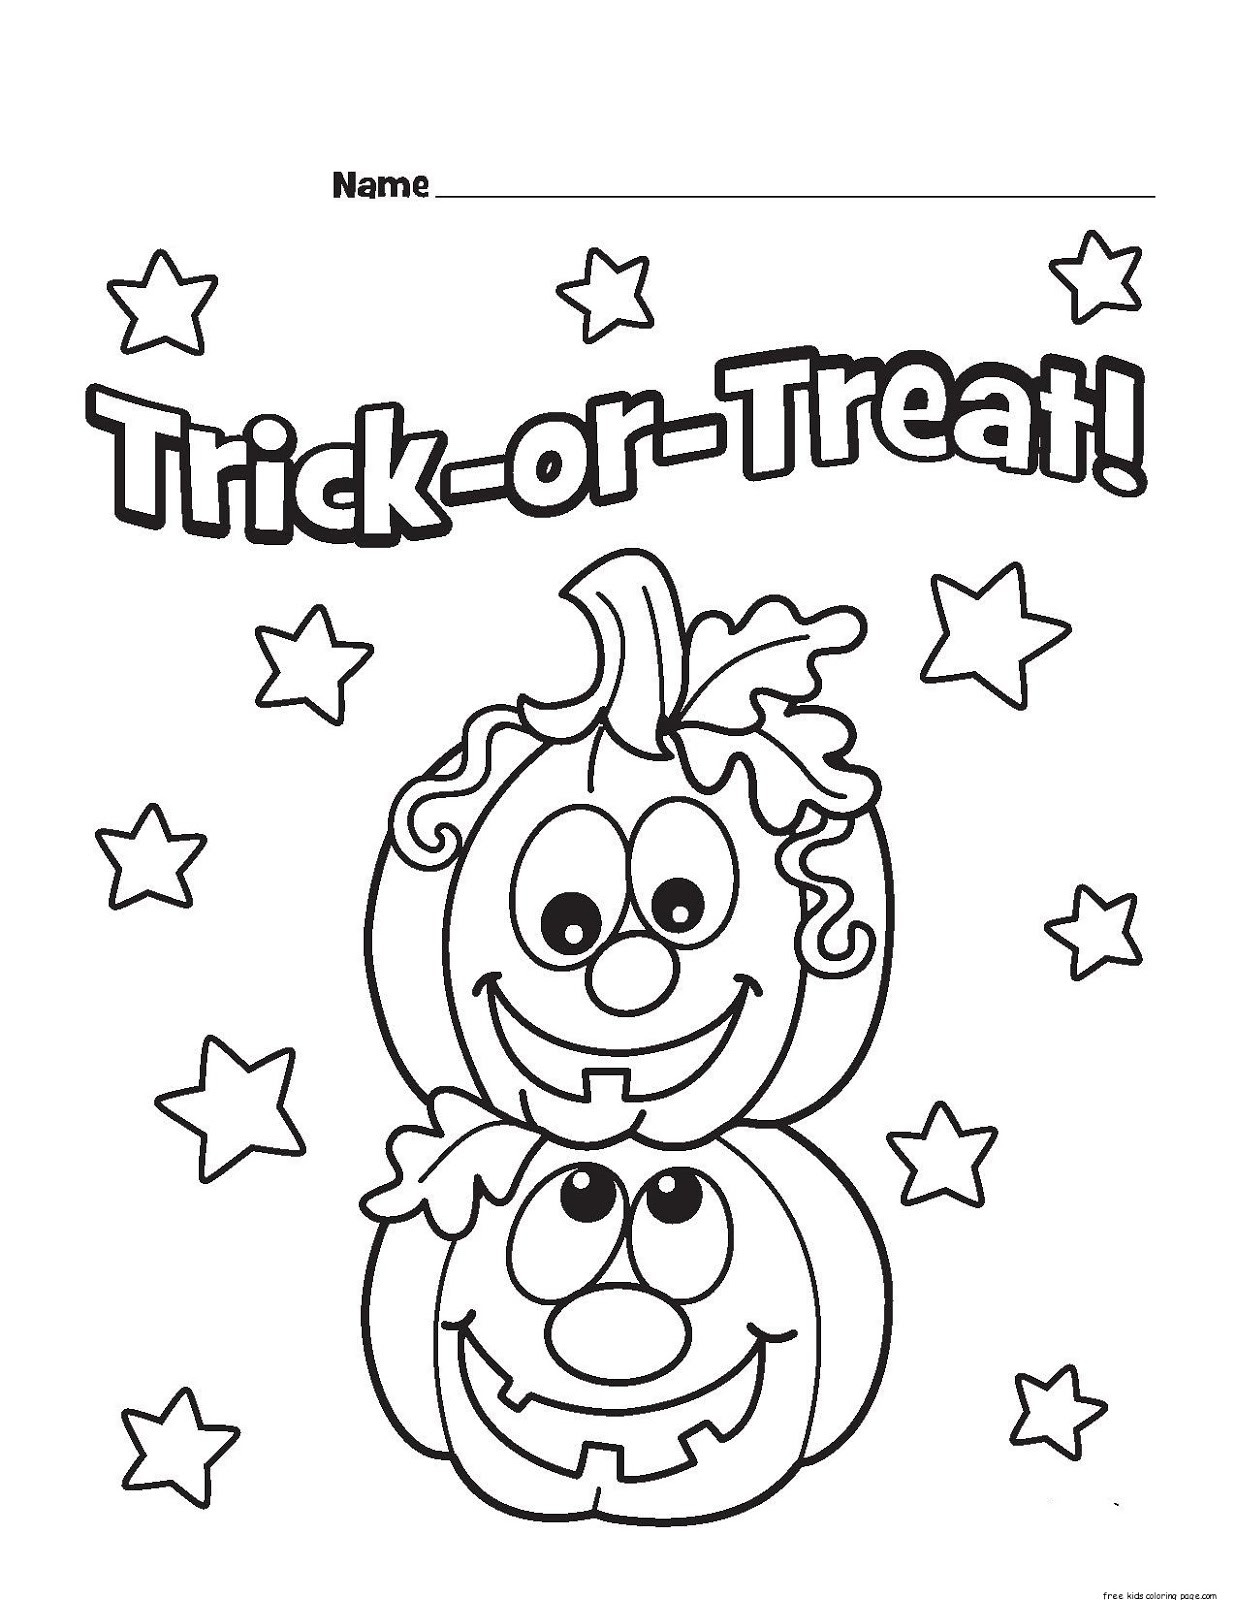 Halloween 2019 trick or treat coloring pages printable for kids | Happy  Halloween 2019 Images